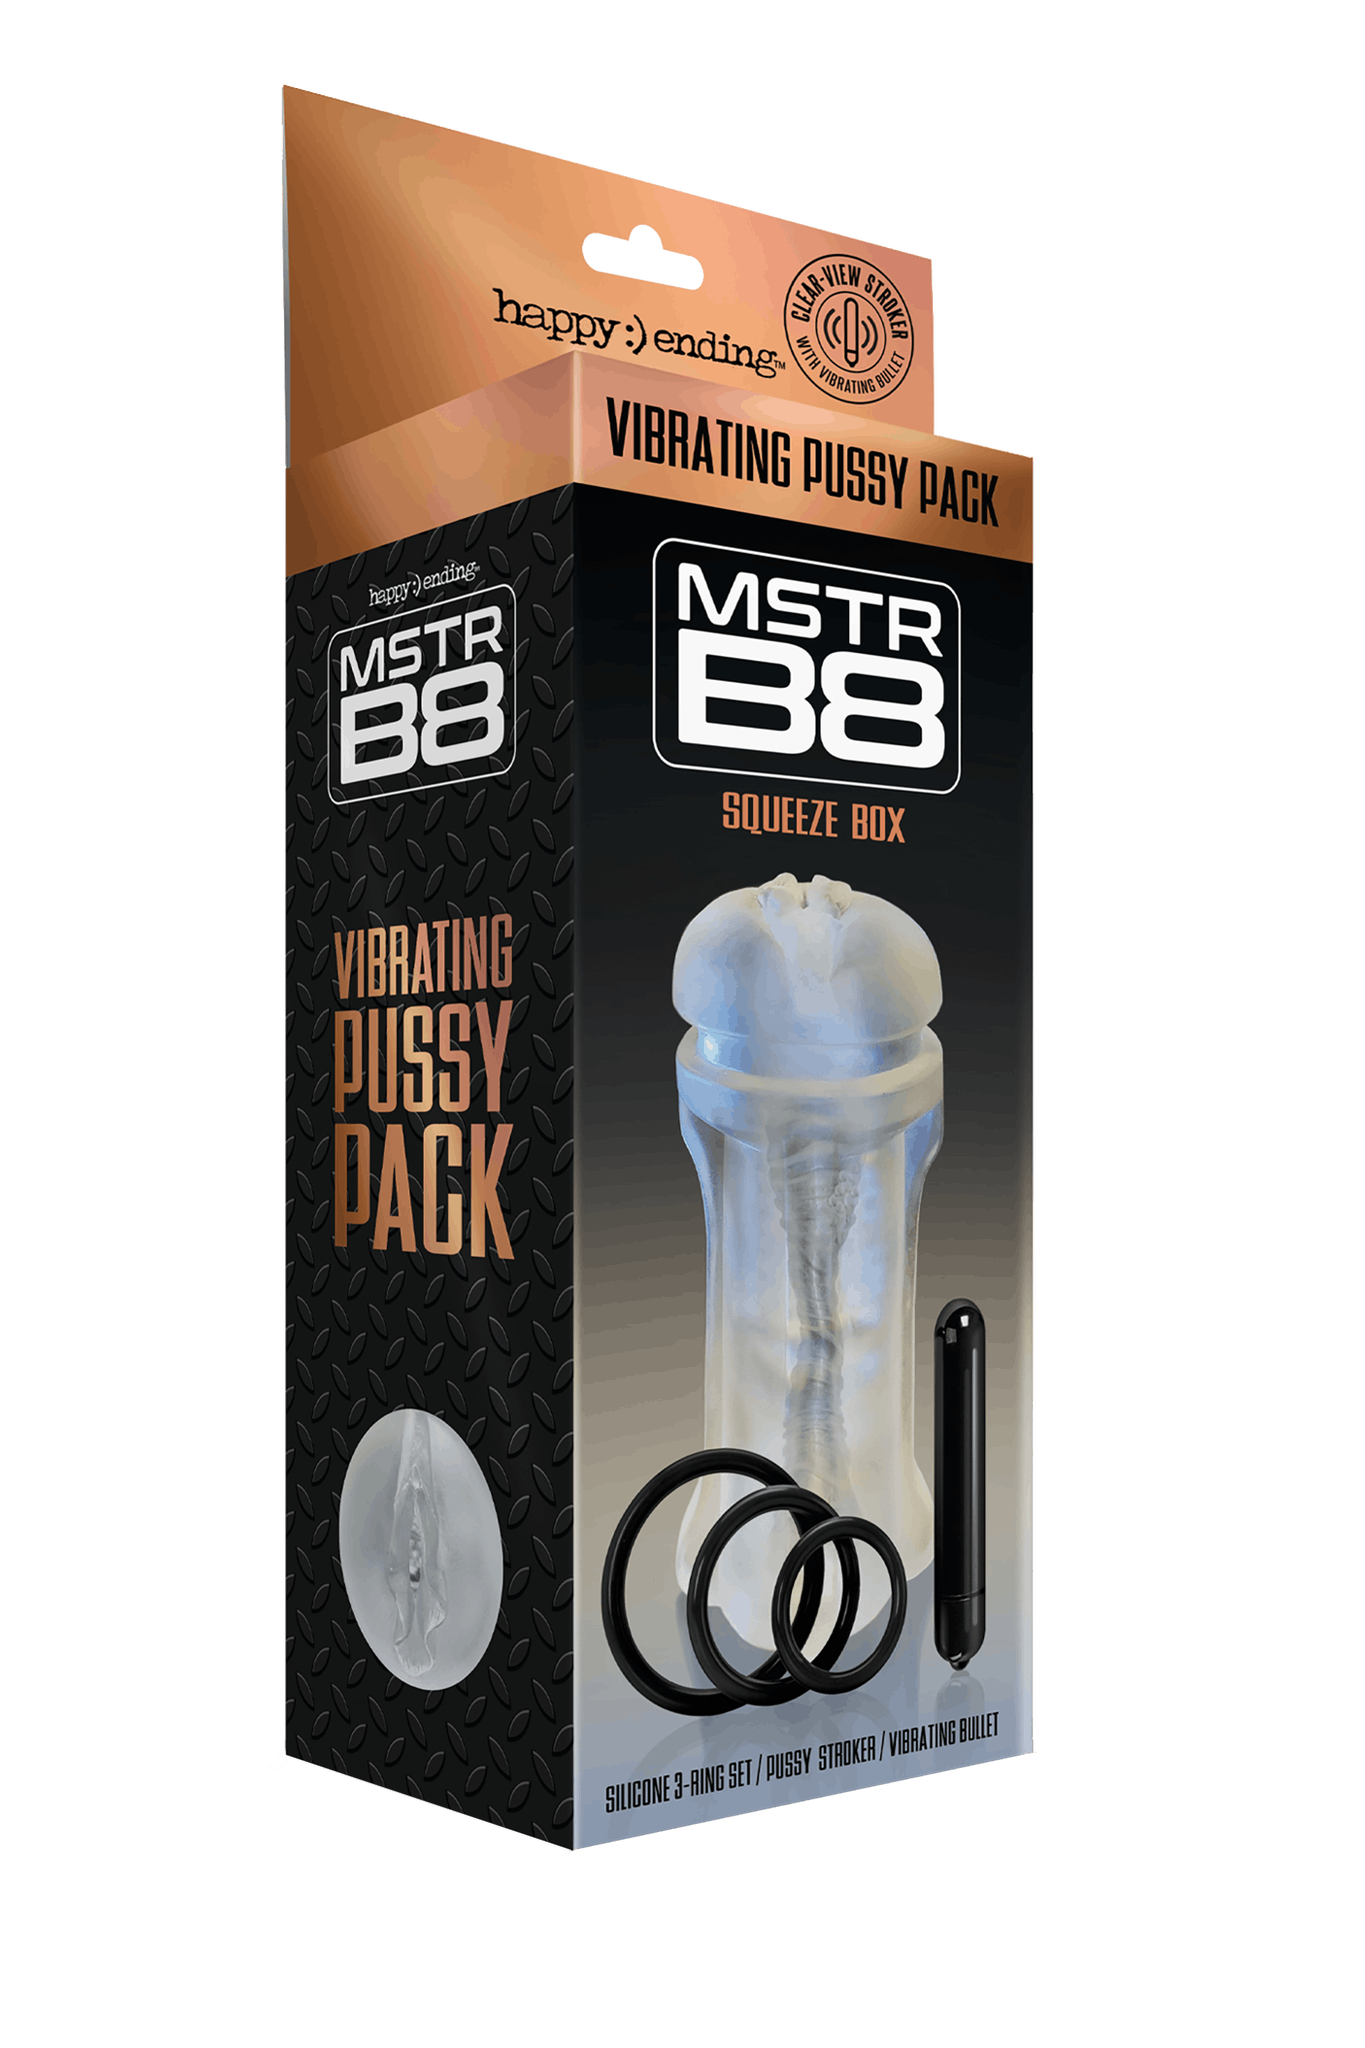 Happy ending, MSTRB8 Vibrating Stroker Pussy pack "Squeeze Box"